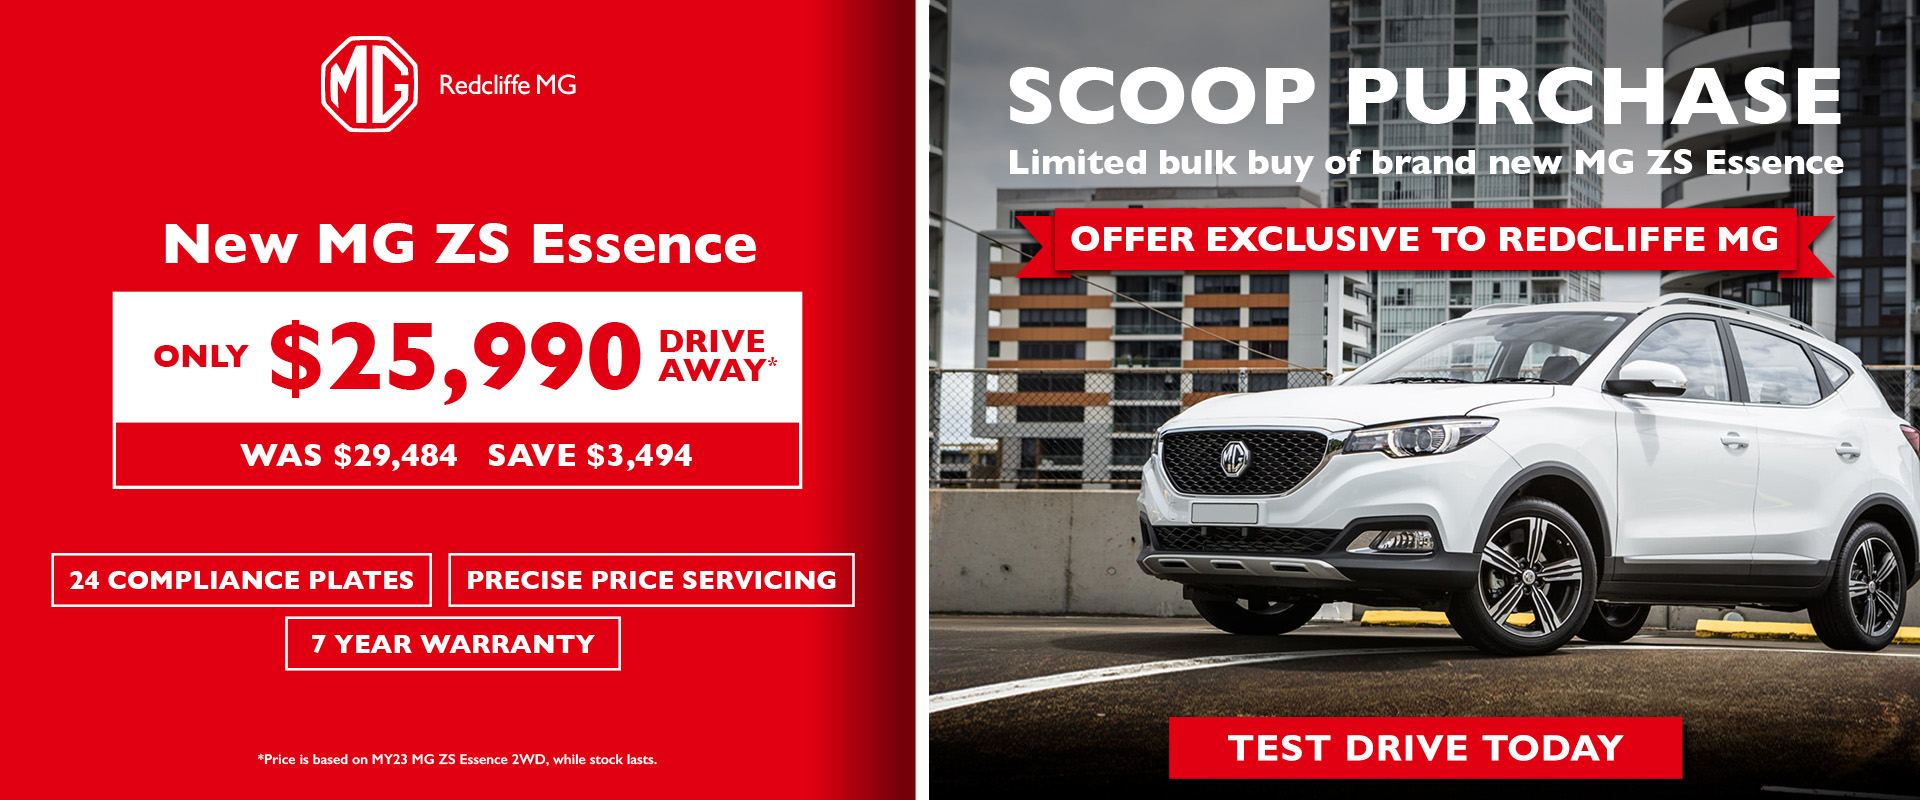 MG ZS Essence 2WD Scoop Purchase